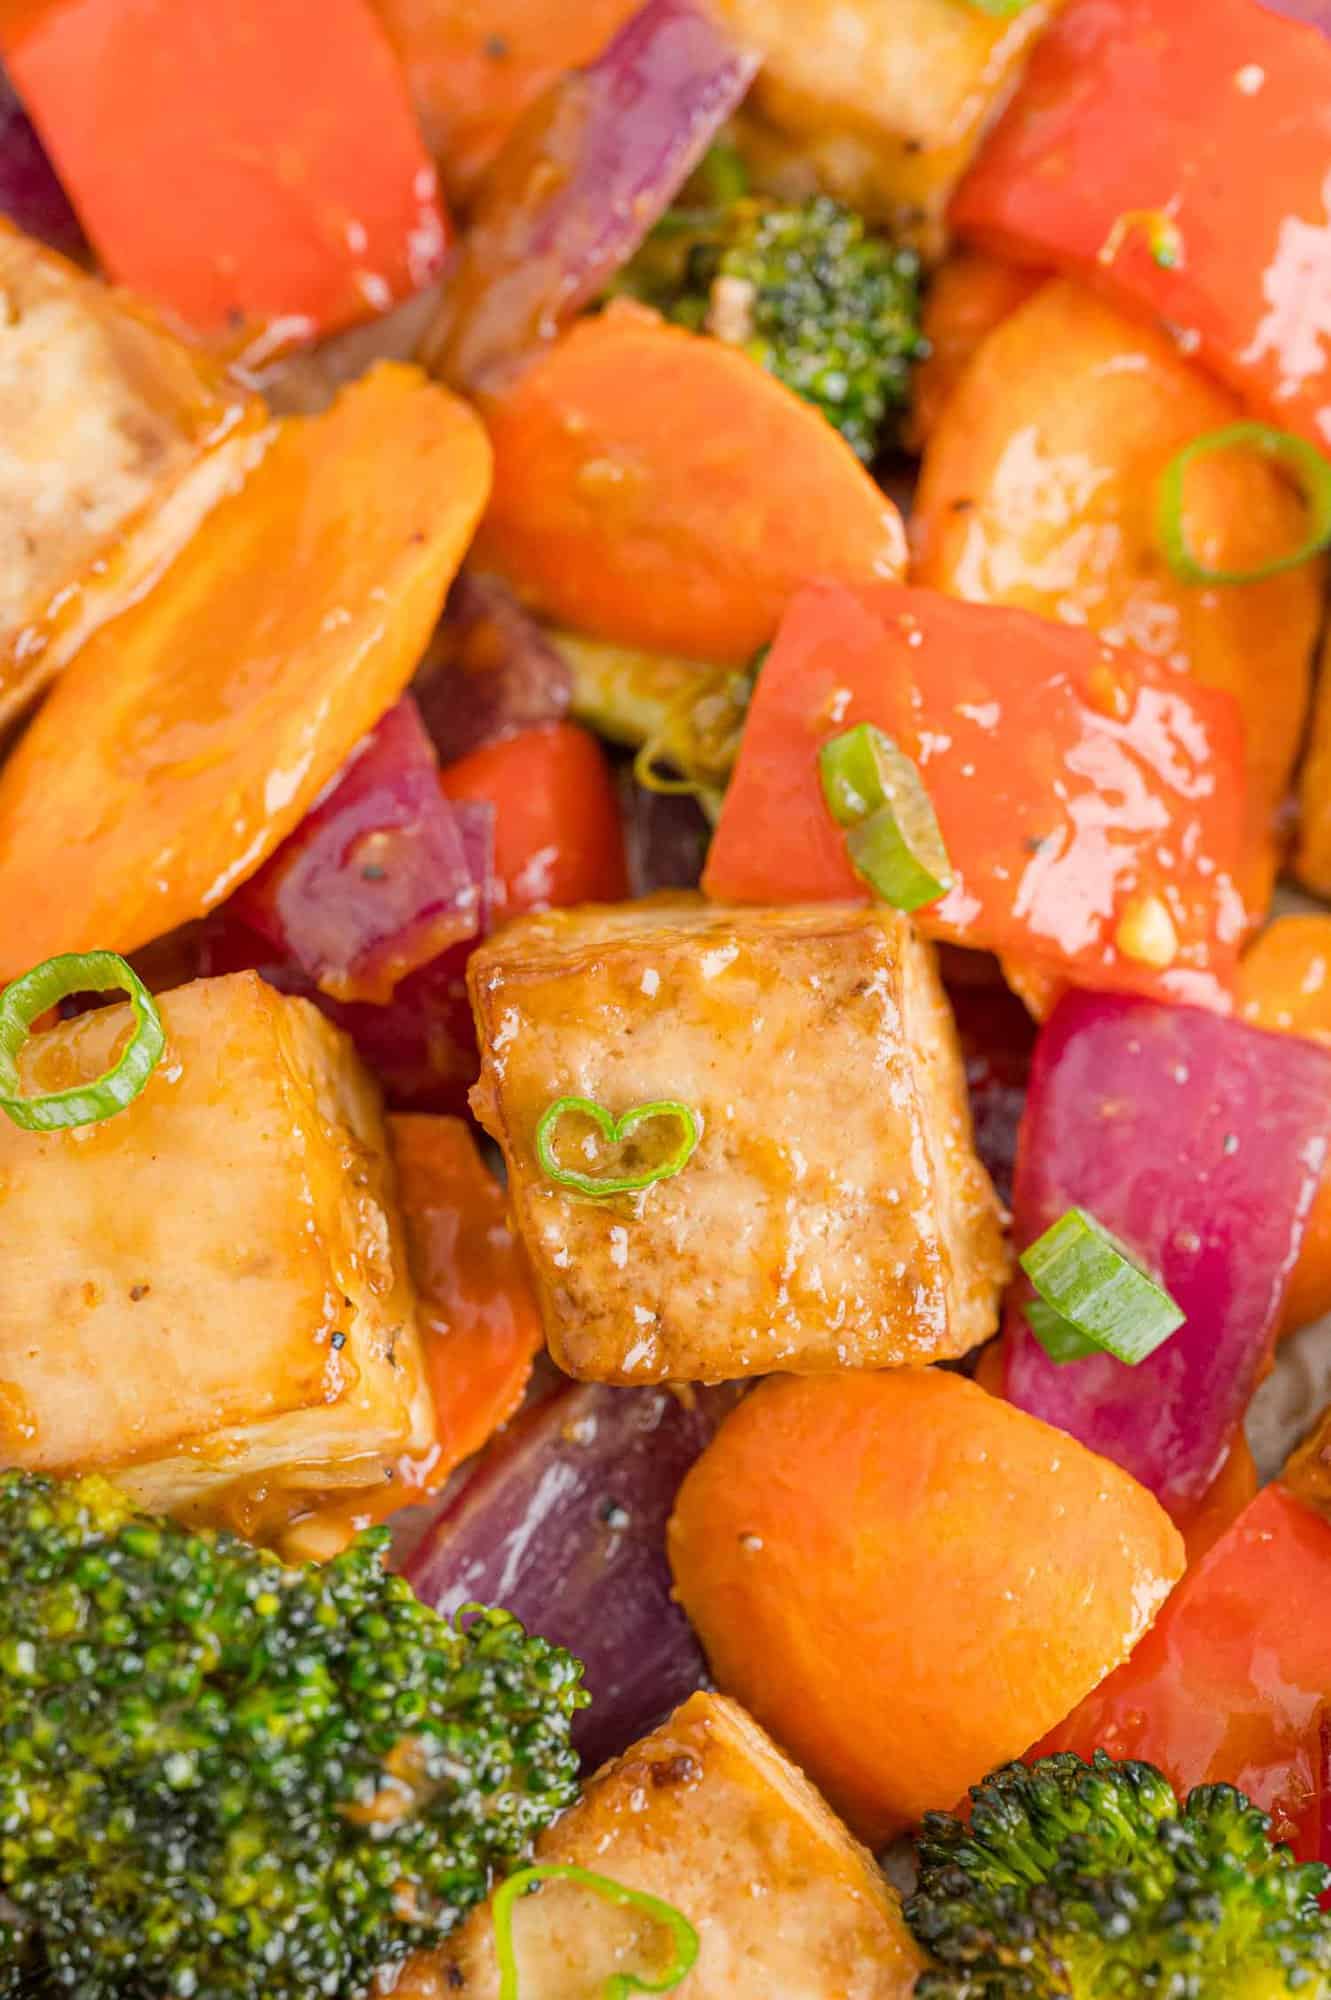 Tofu and vegetables coated with peanut butter sauce.